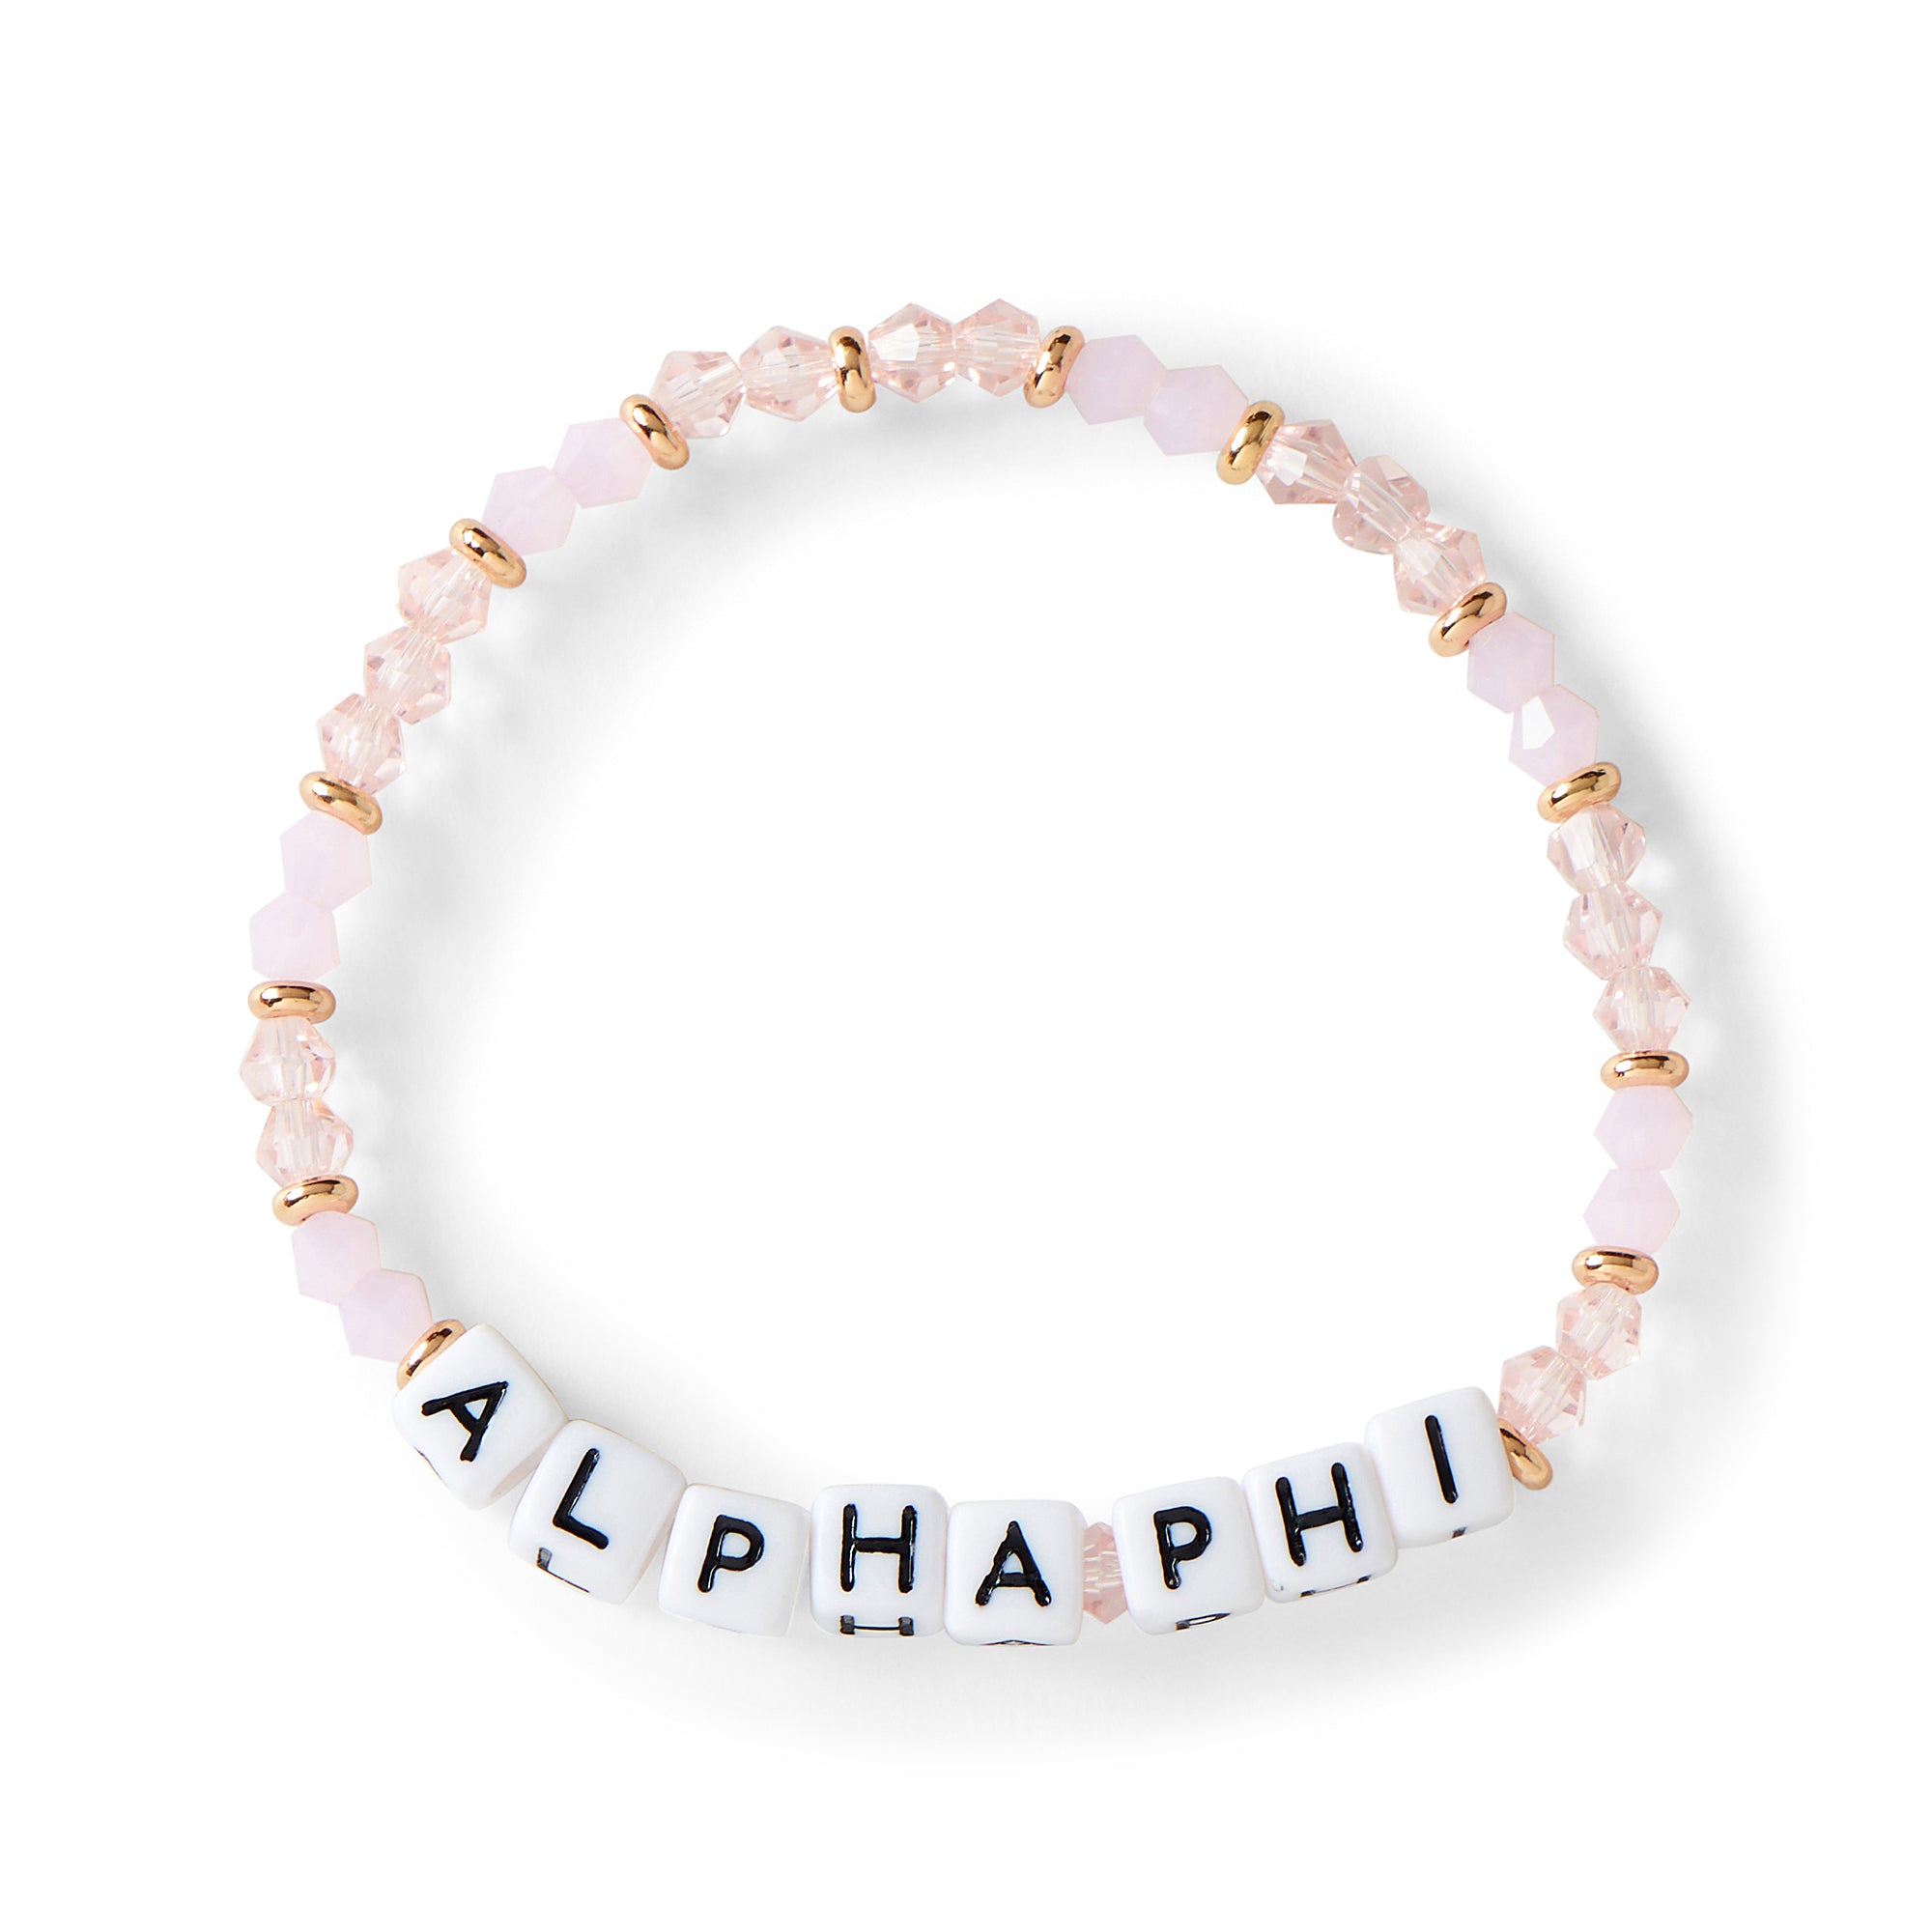 Baby Pink Letter Beads for Bracelets, Name Beads, Alphabet Beads, Alph